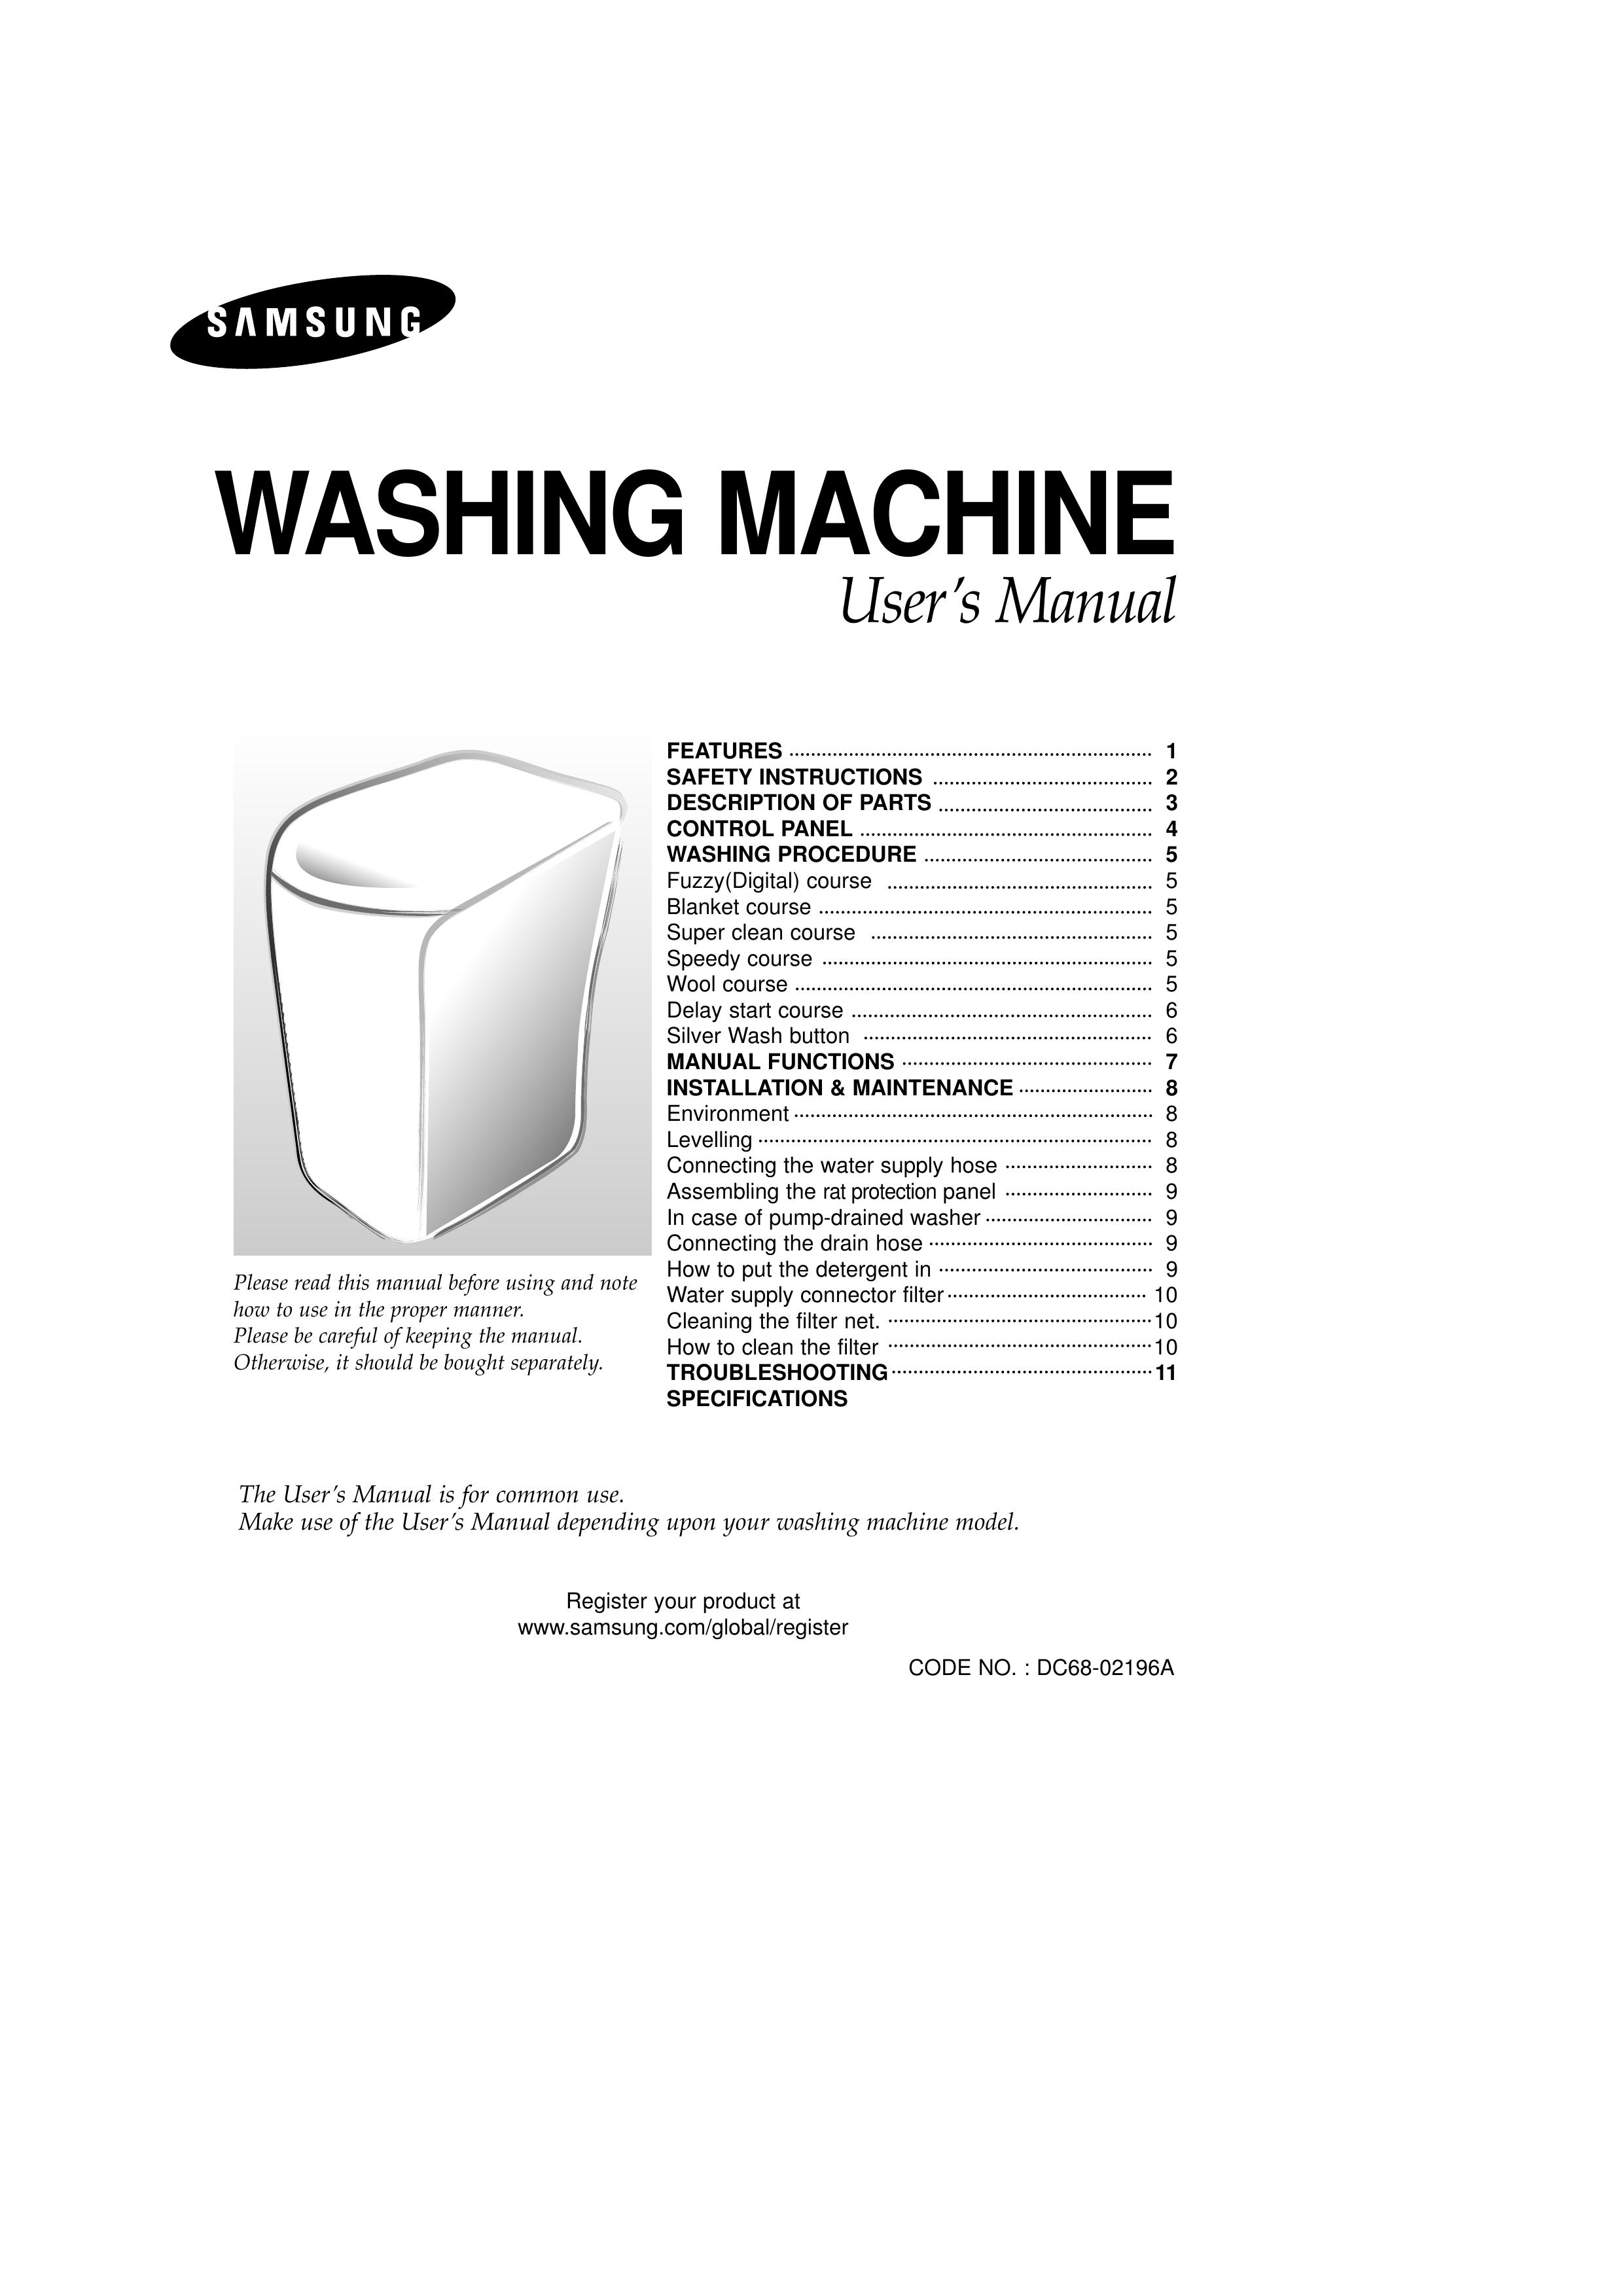 Samsung DC68-02196A Washer/Dryer User Manual